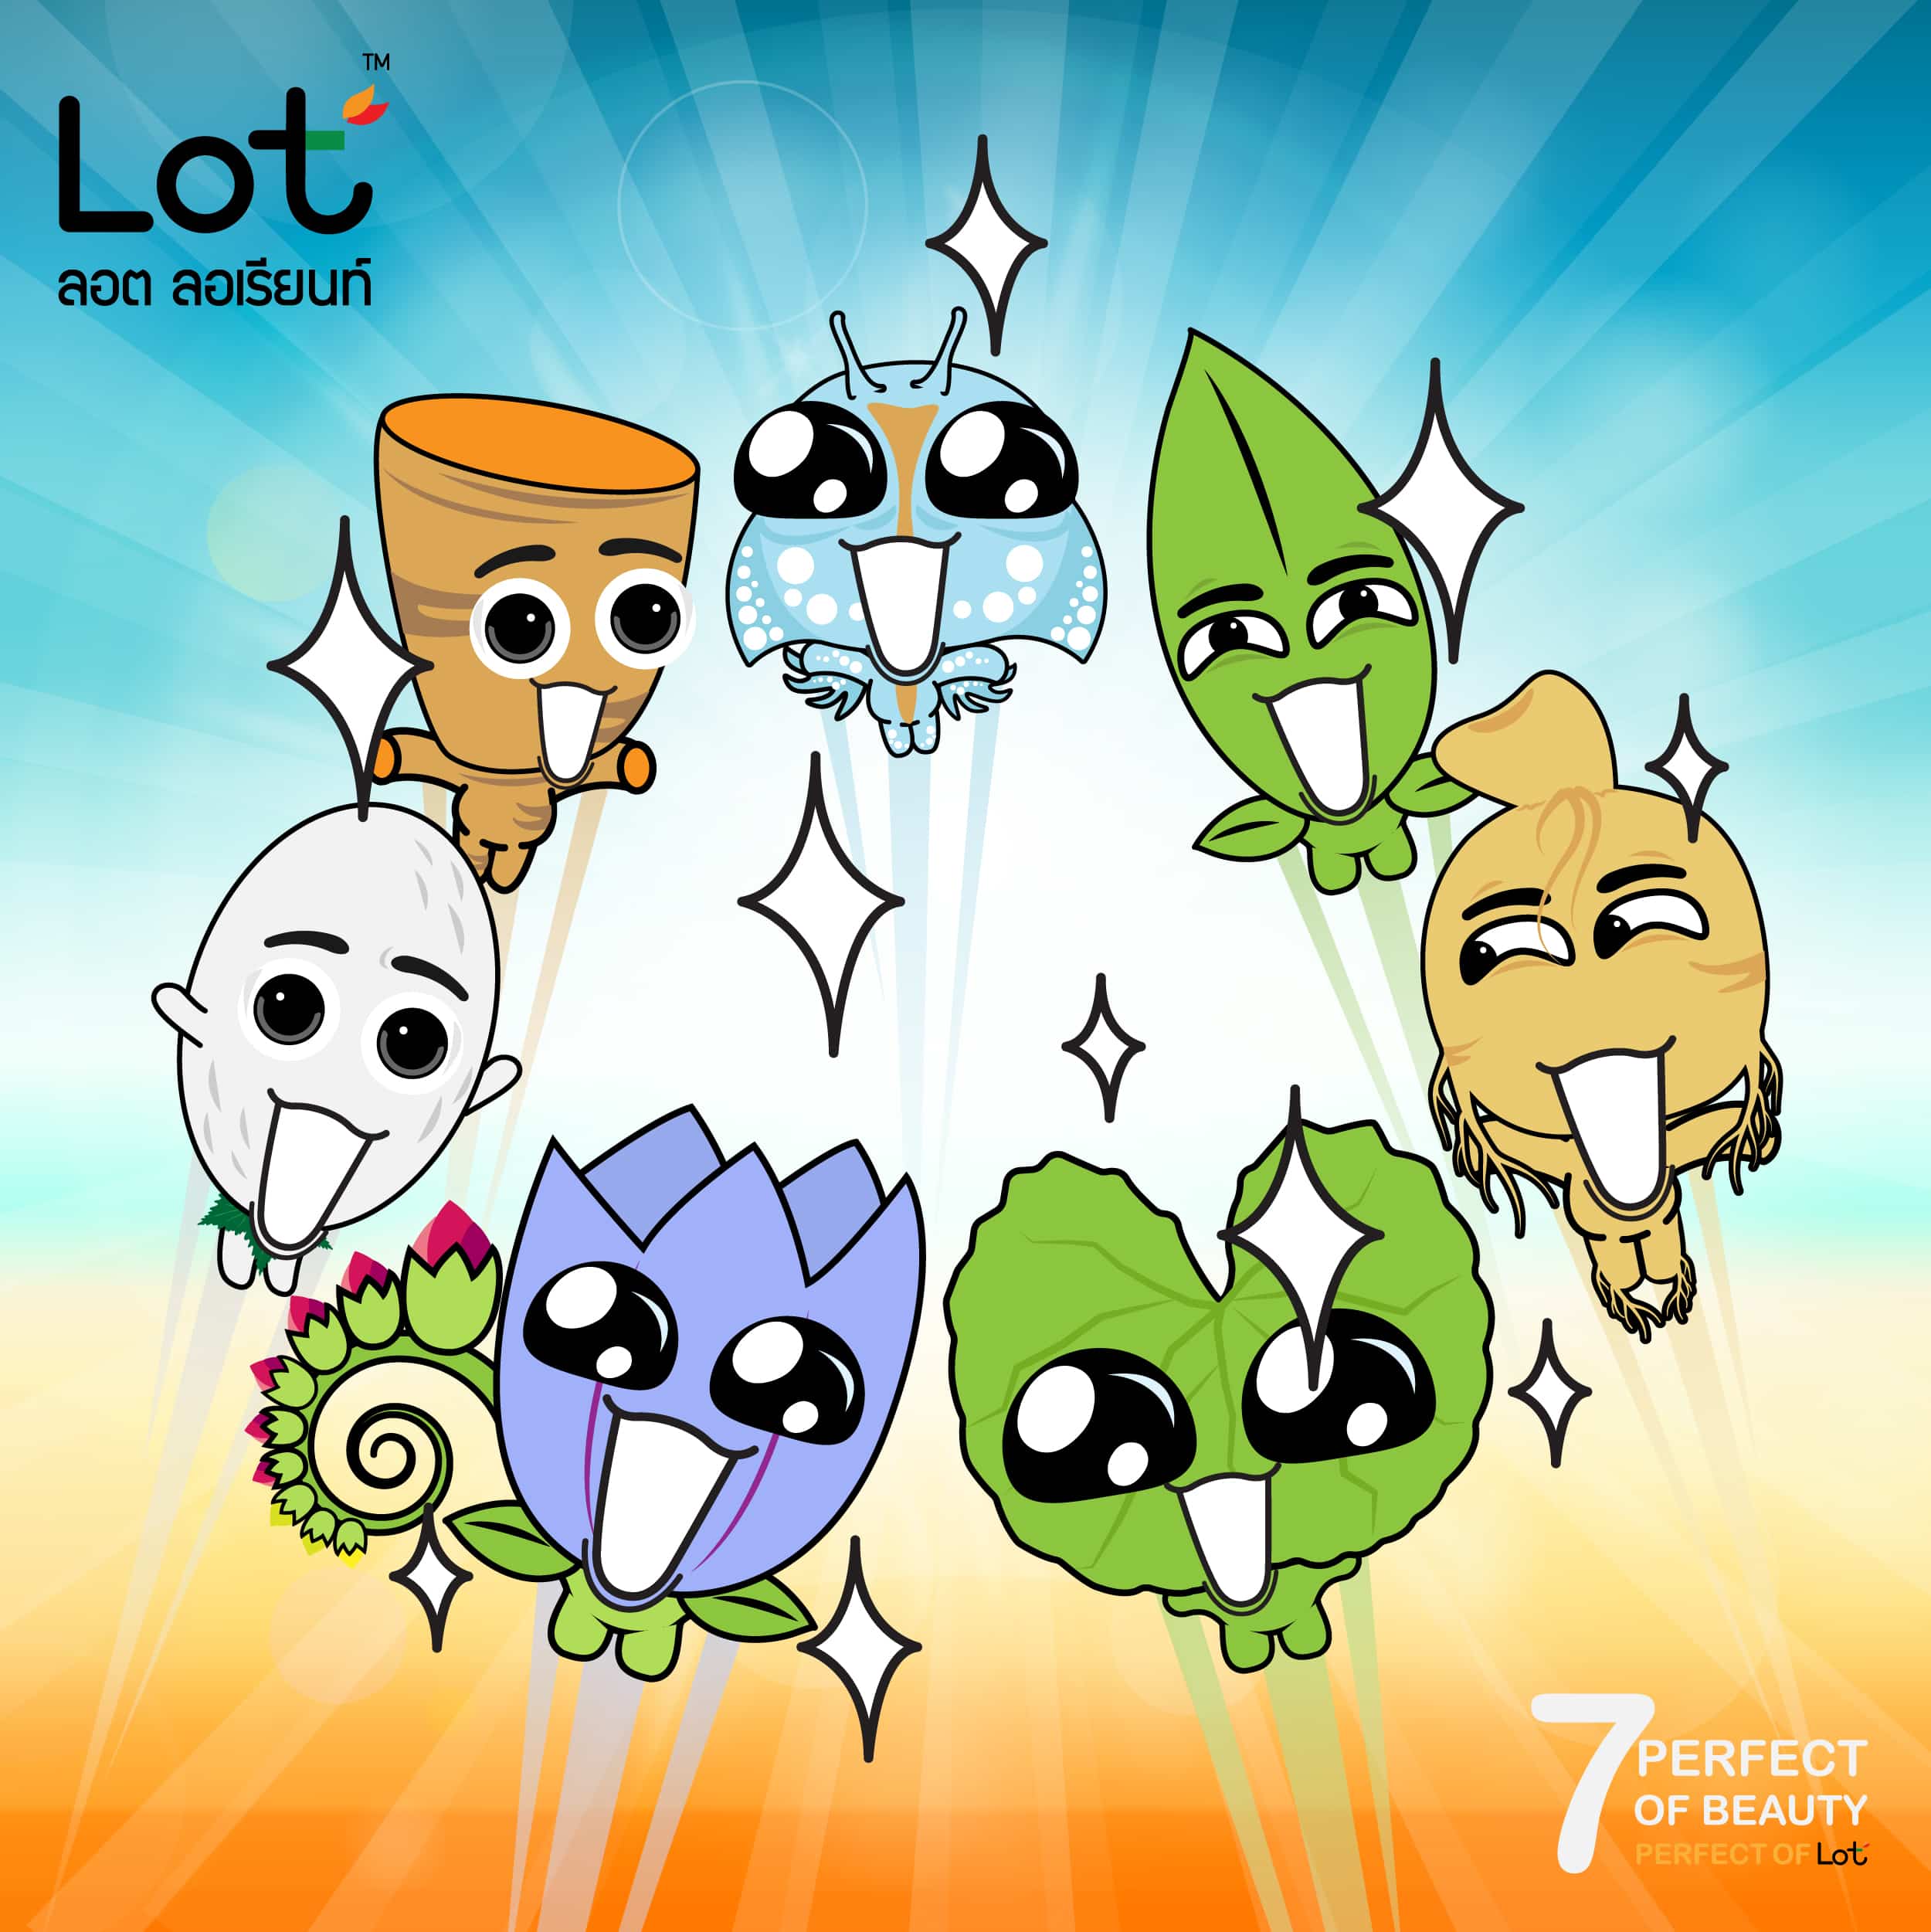 7 perfect of LOT : the story